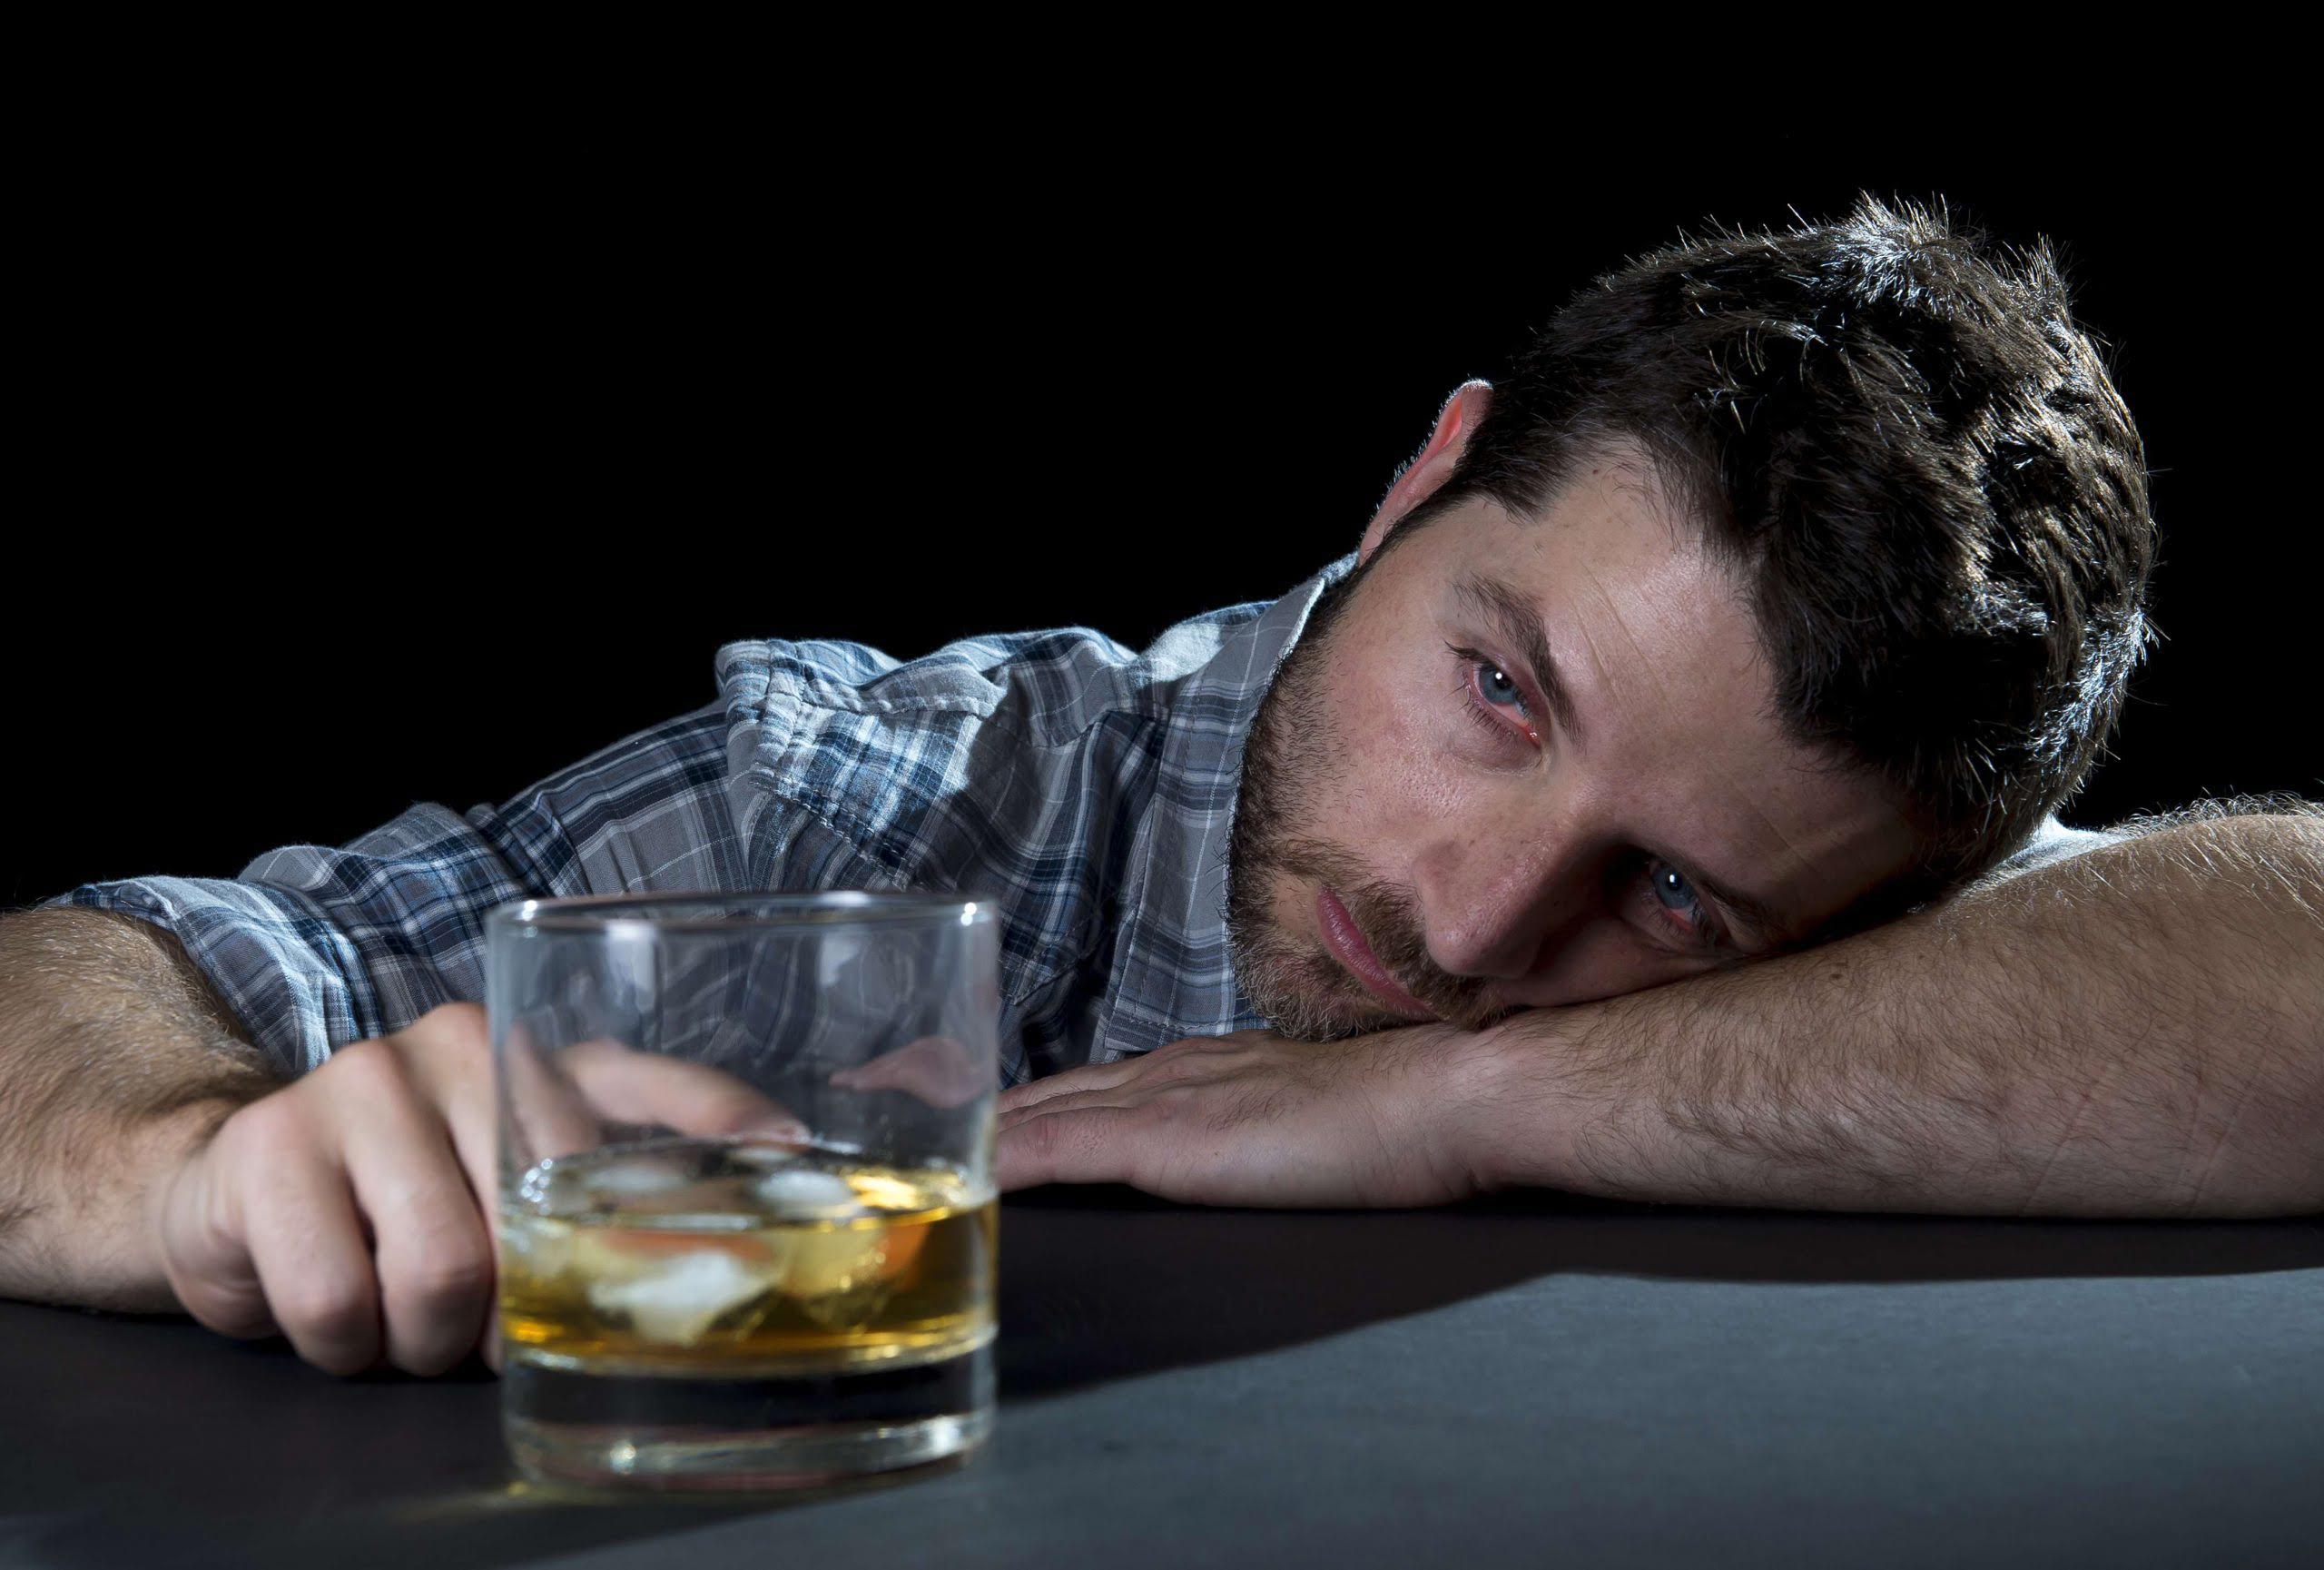 can alcohol dehydrate you